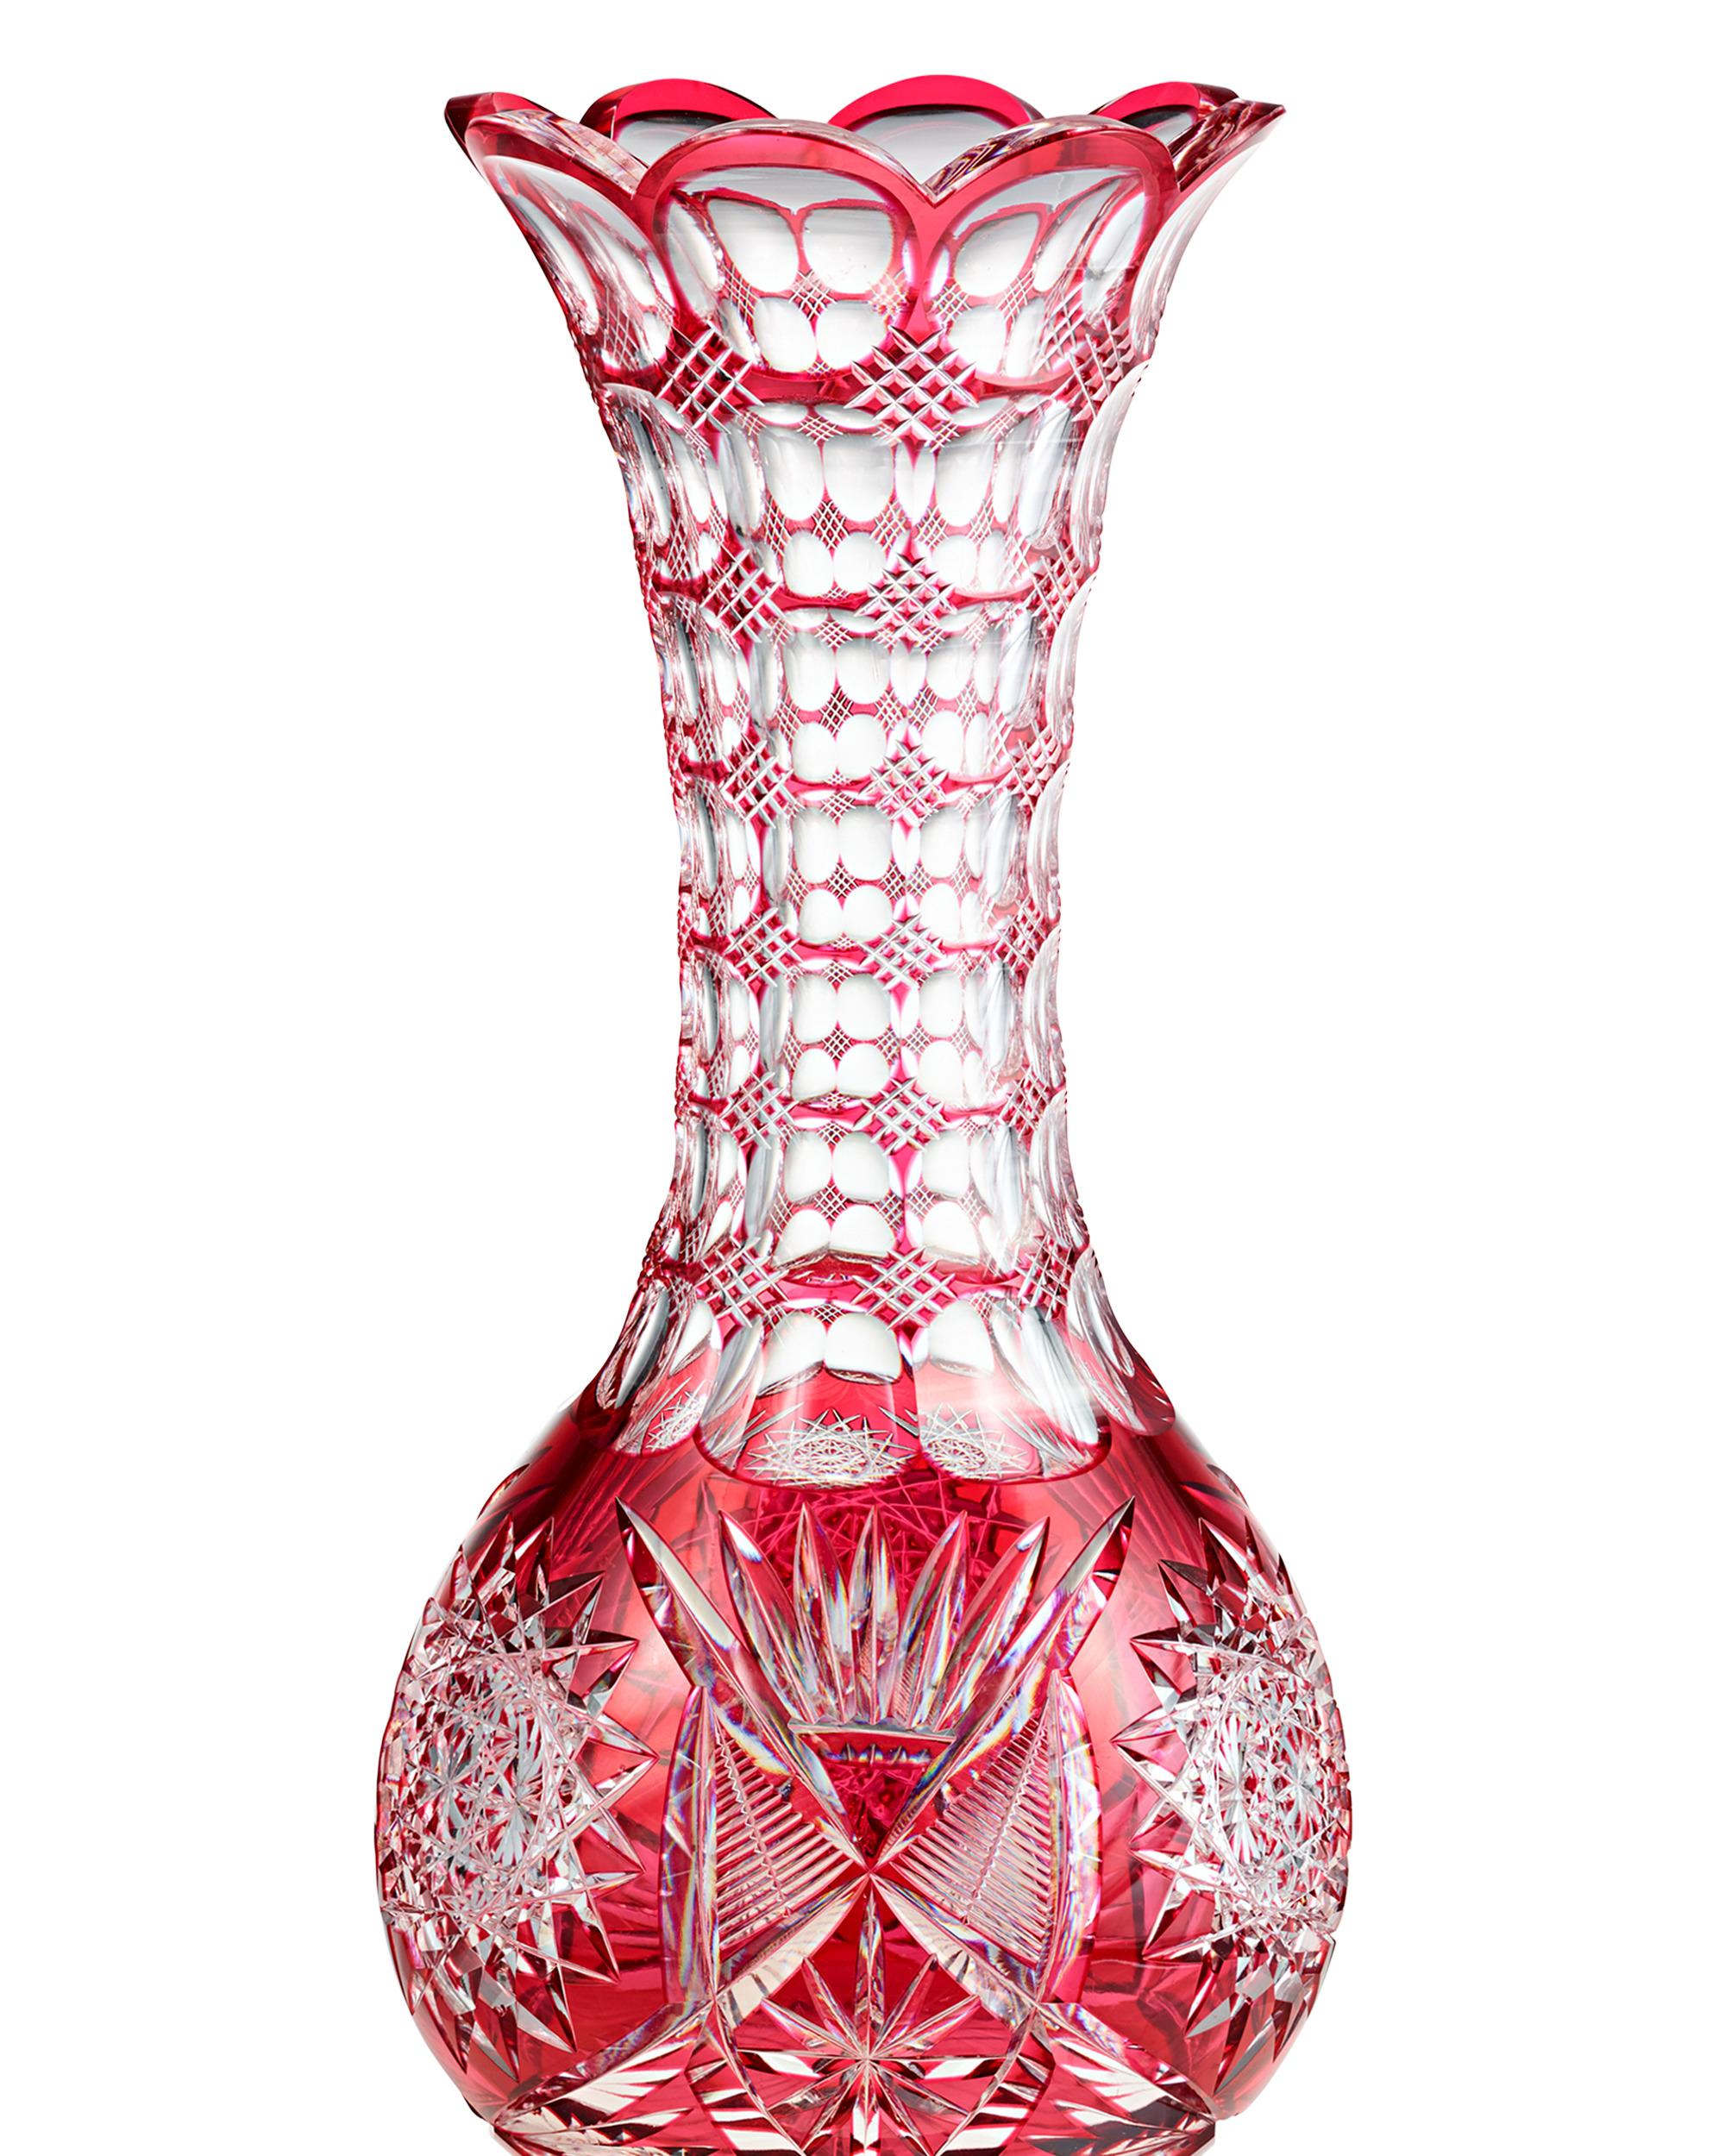 This remarkably exquisite cut glass vase was crafted by one of the oldest glassworks firms in the United States, Pairpoint. The elaborate cut-to-clear decoration is brilliantly cut from a striking bright red to clear in a meticulous geometric